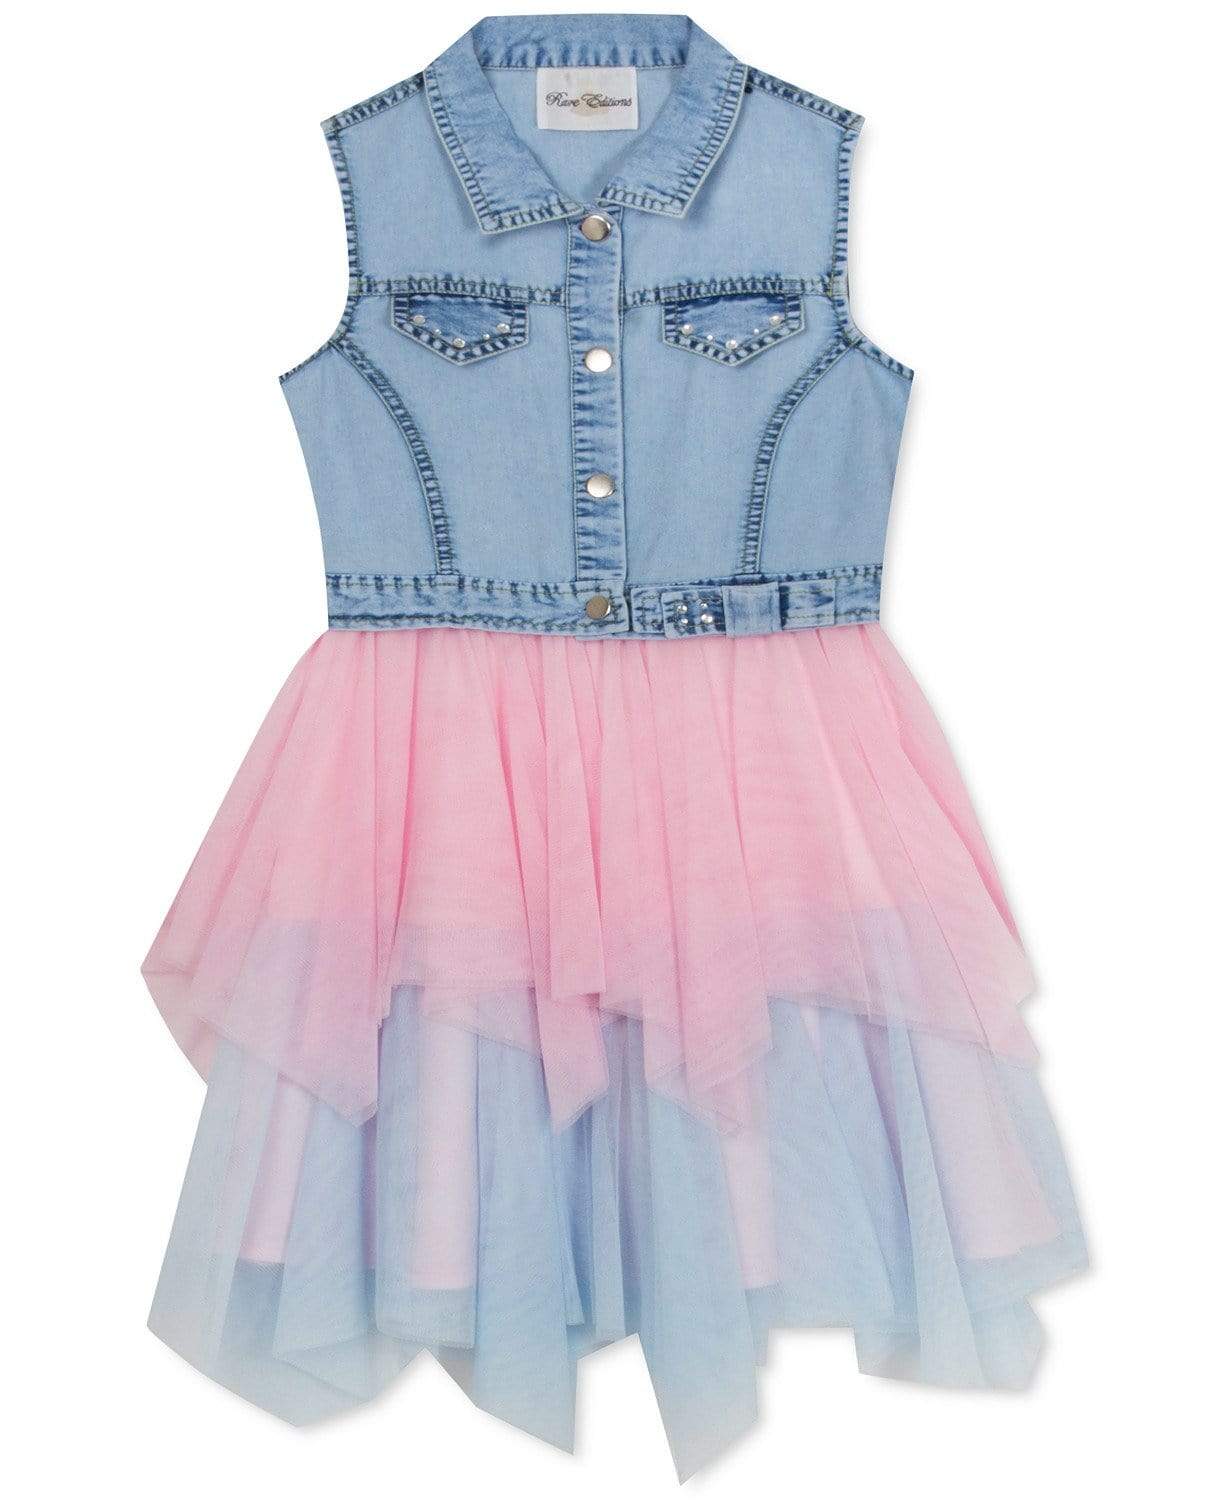 RARE EDITIONS Girls Dress 4 Years / Multi-Color / G6 RARE EDITIONS - Little Girls Denim & Glitter Mesh Dress